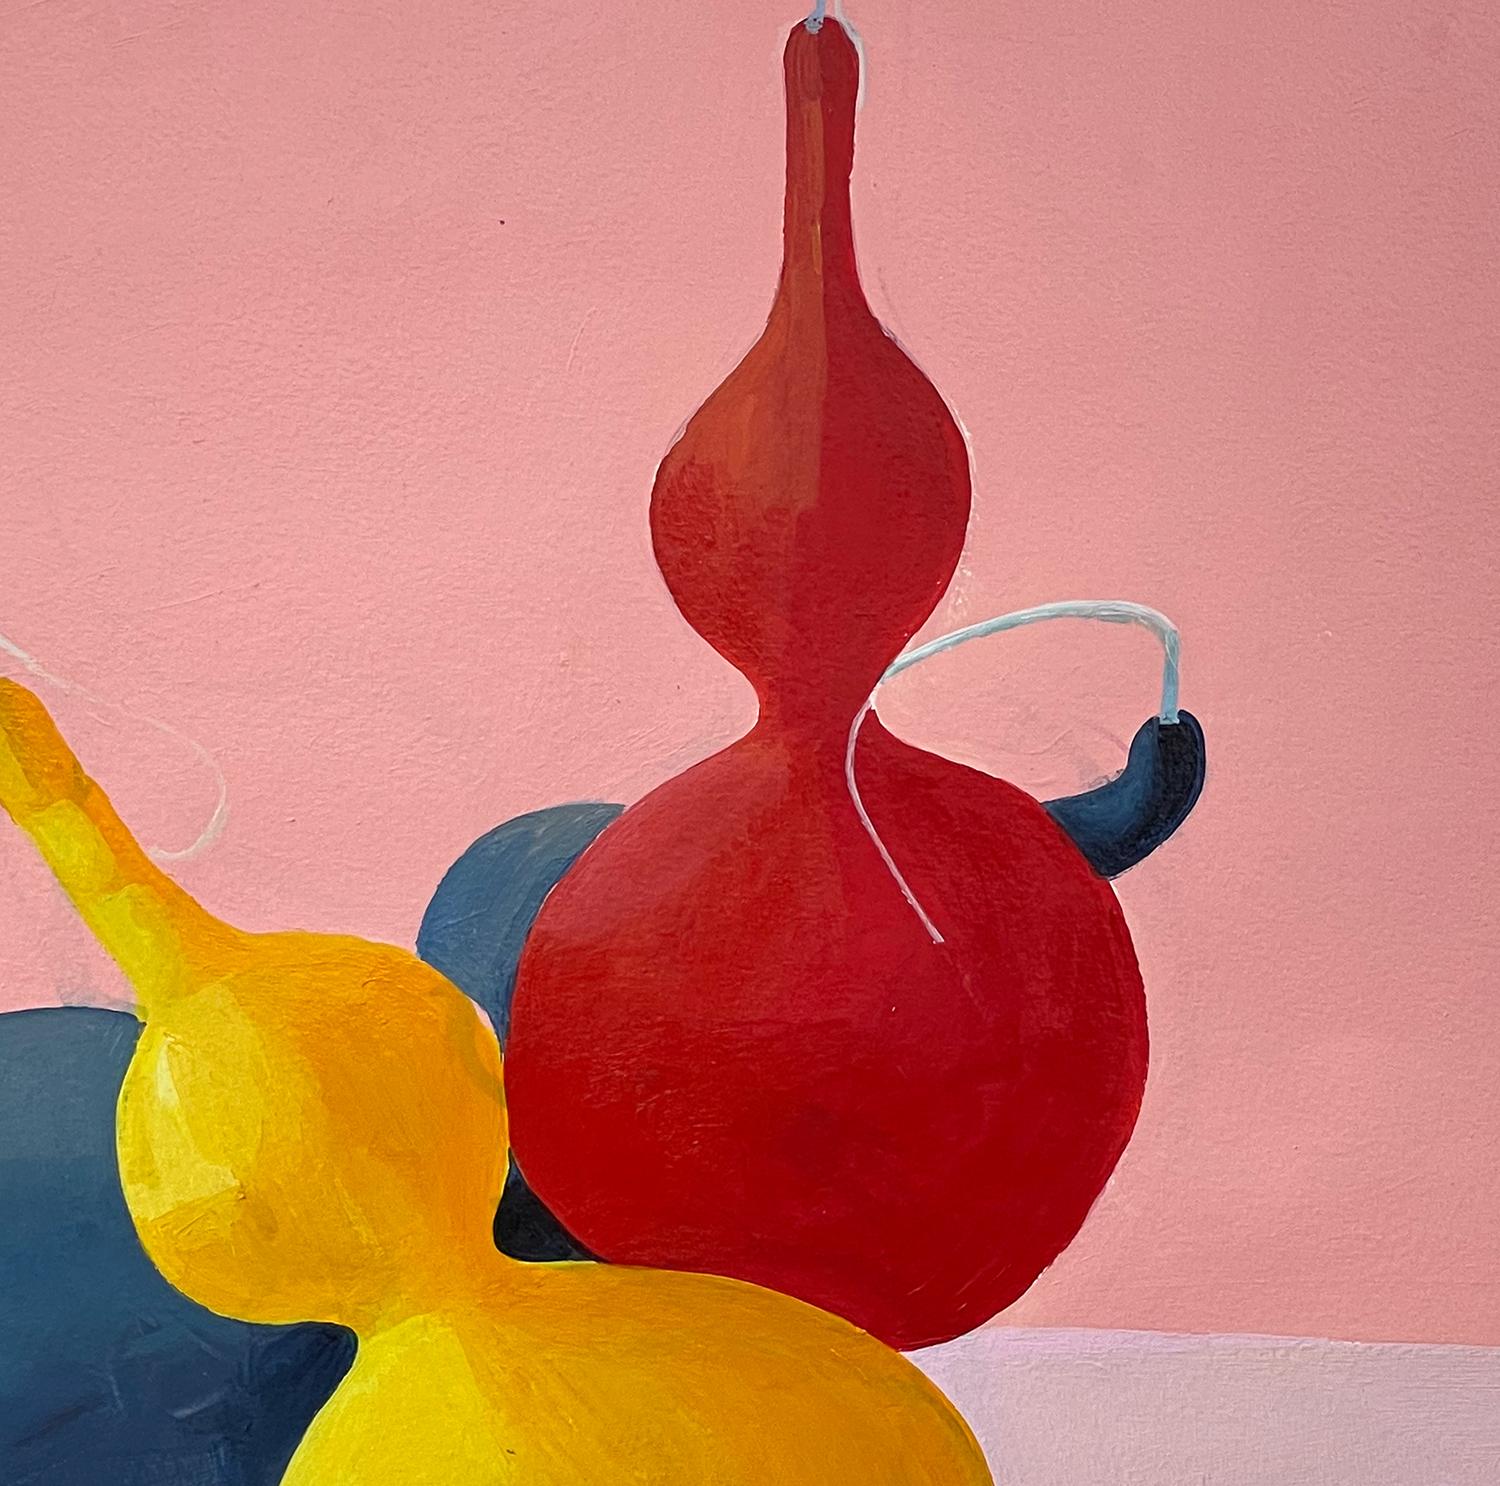 <p>Artist Comments<br />In this modern minimalistic still life, artist Ziui Vance paints a group of gourds in yellow, red, and blue against a pink pastel tone. 